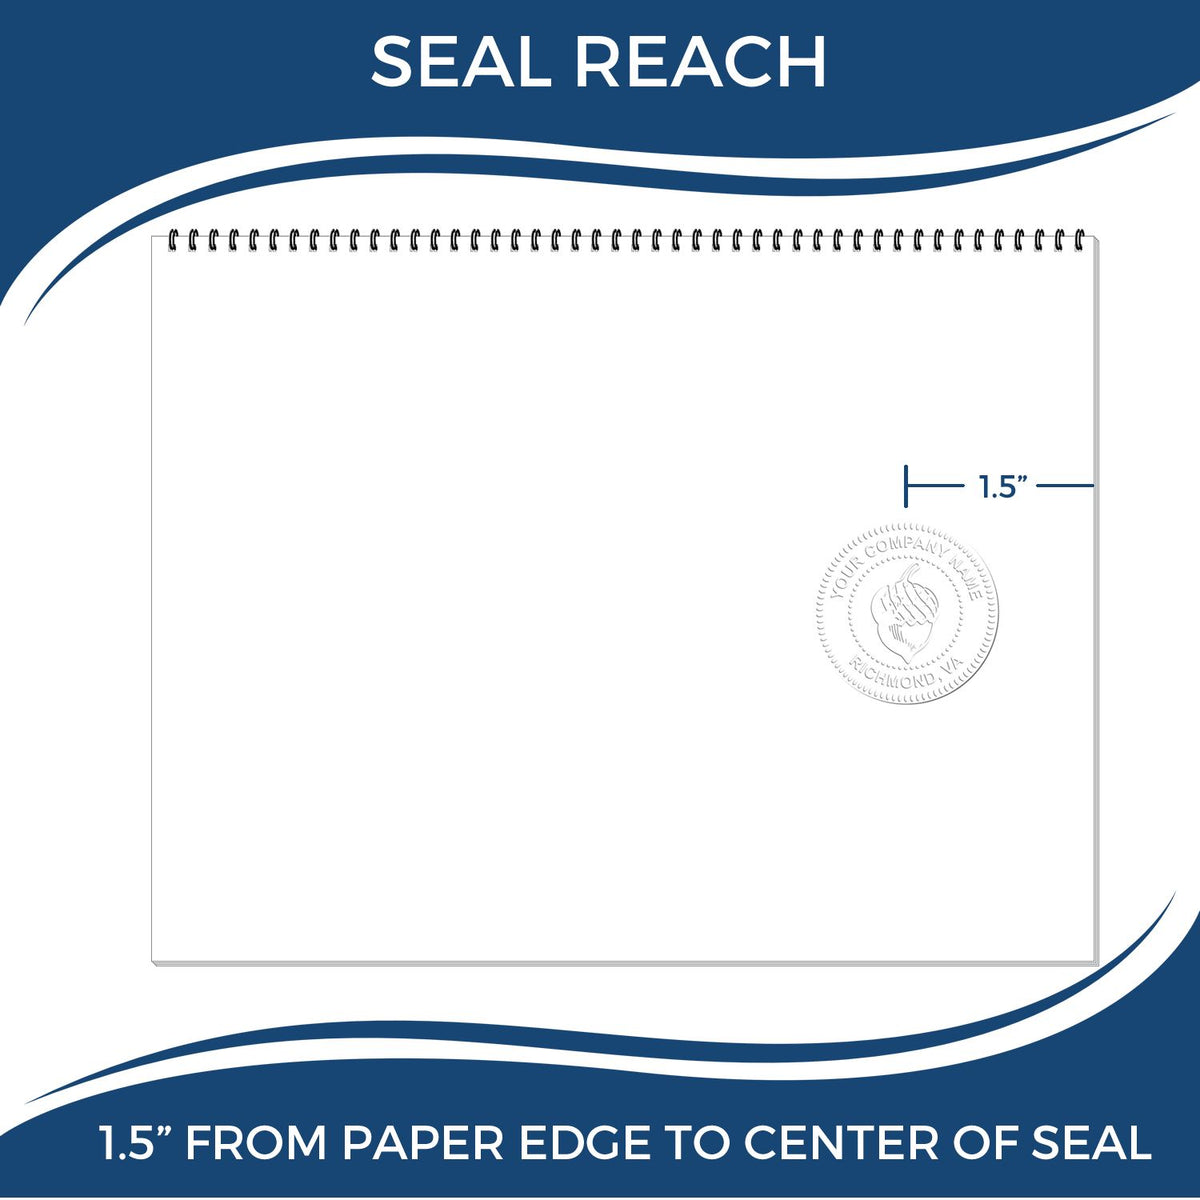 An infographic showing the seal reach which is represented by a ruler and a miniature seal image of the Soft Louisiana Professional Geologist Seal